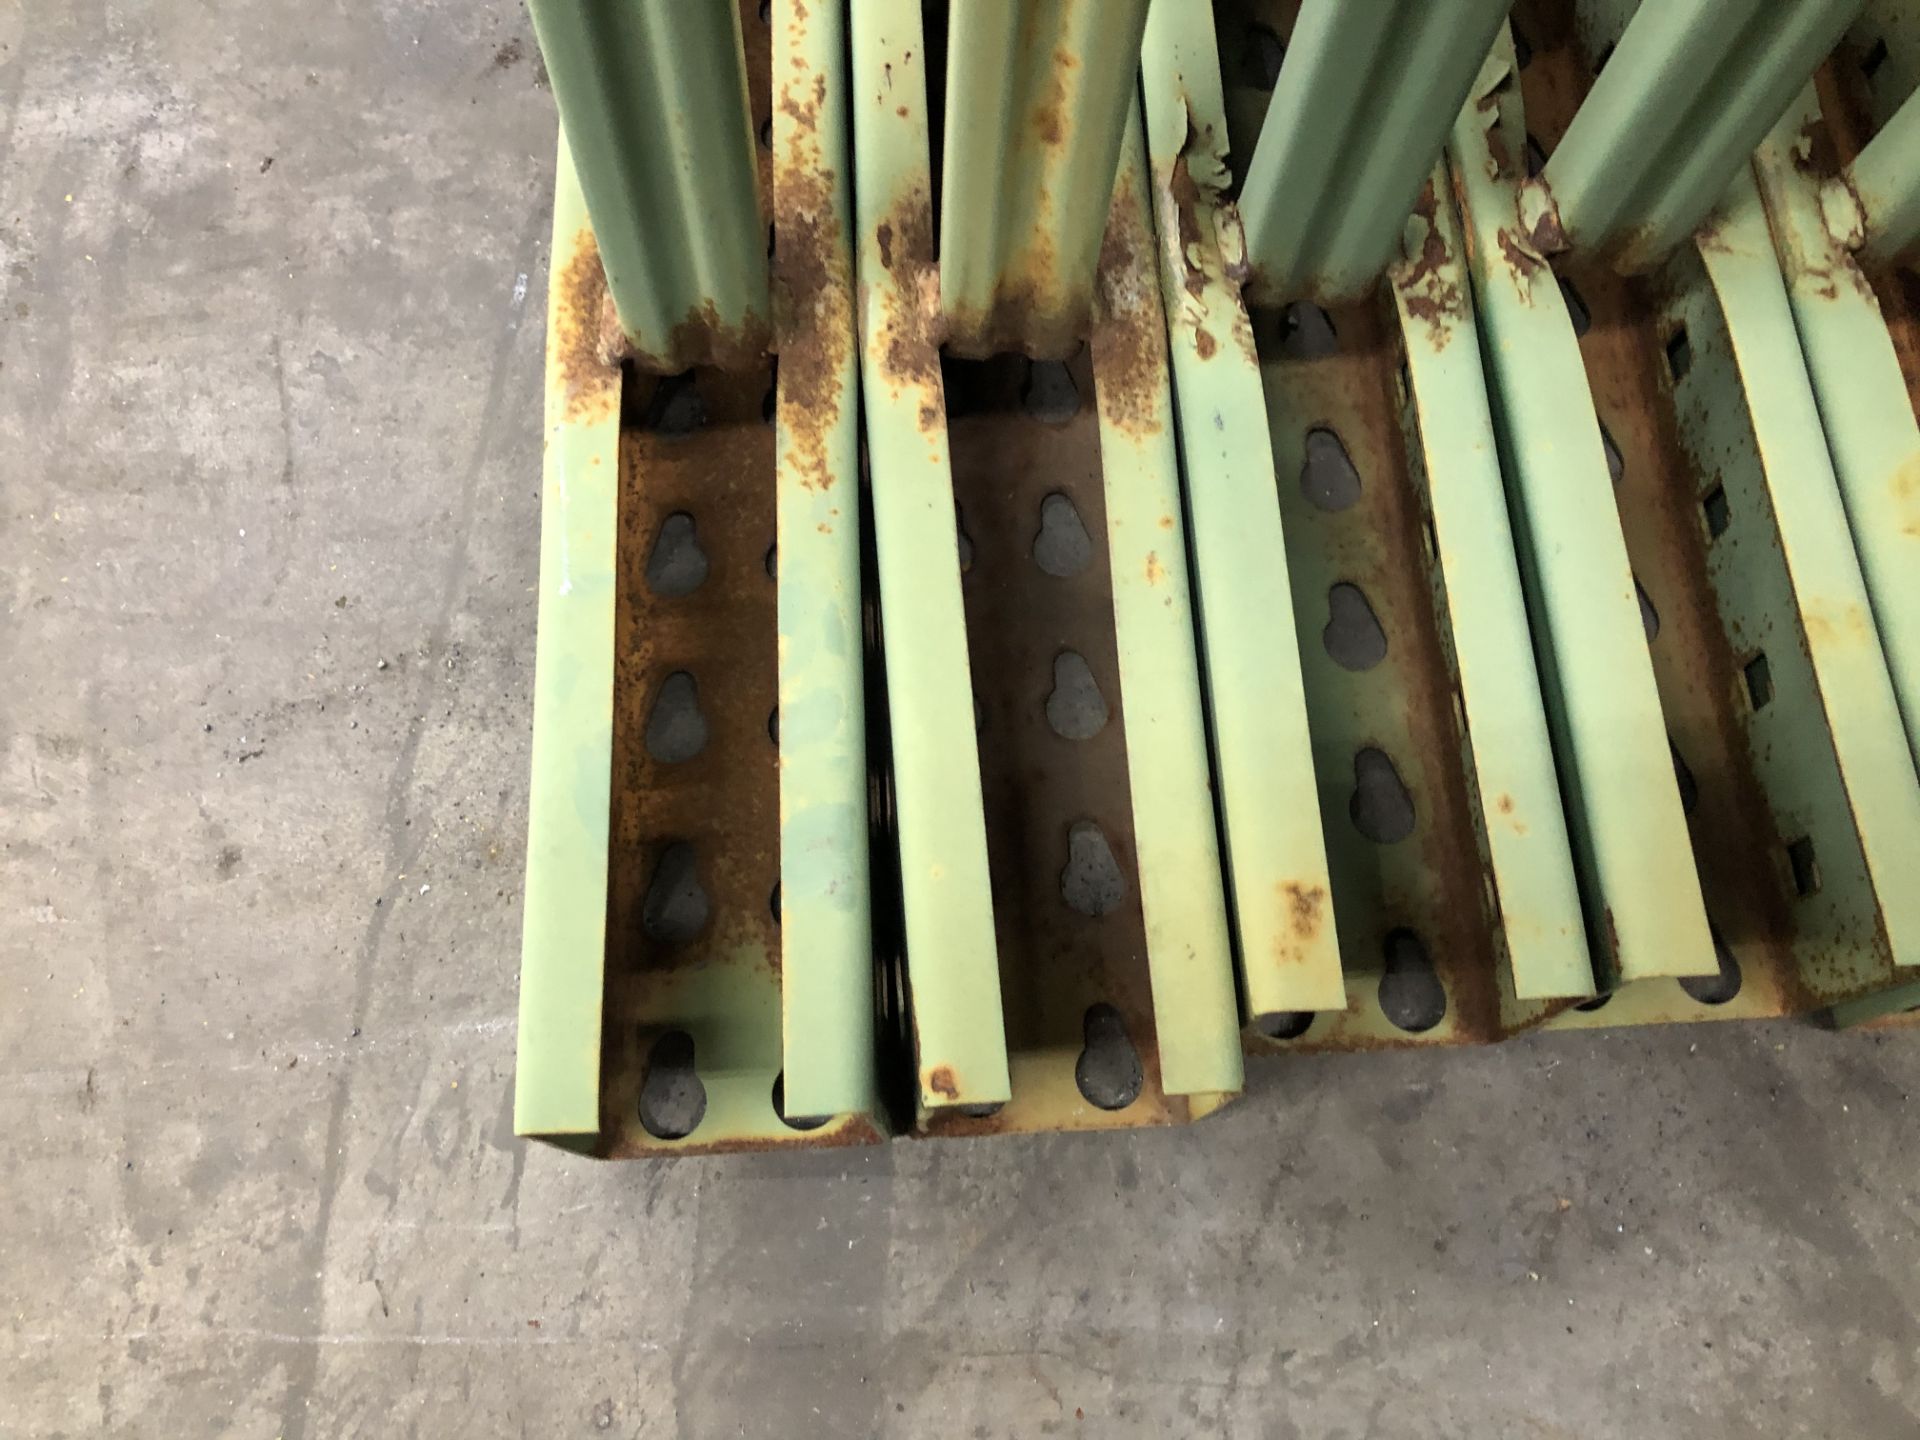 LOT OF TRUCK LOAD USED PALLET RACKS - 16"H X 34"D X 96"L - Image 3 of 3